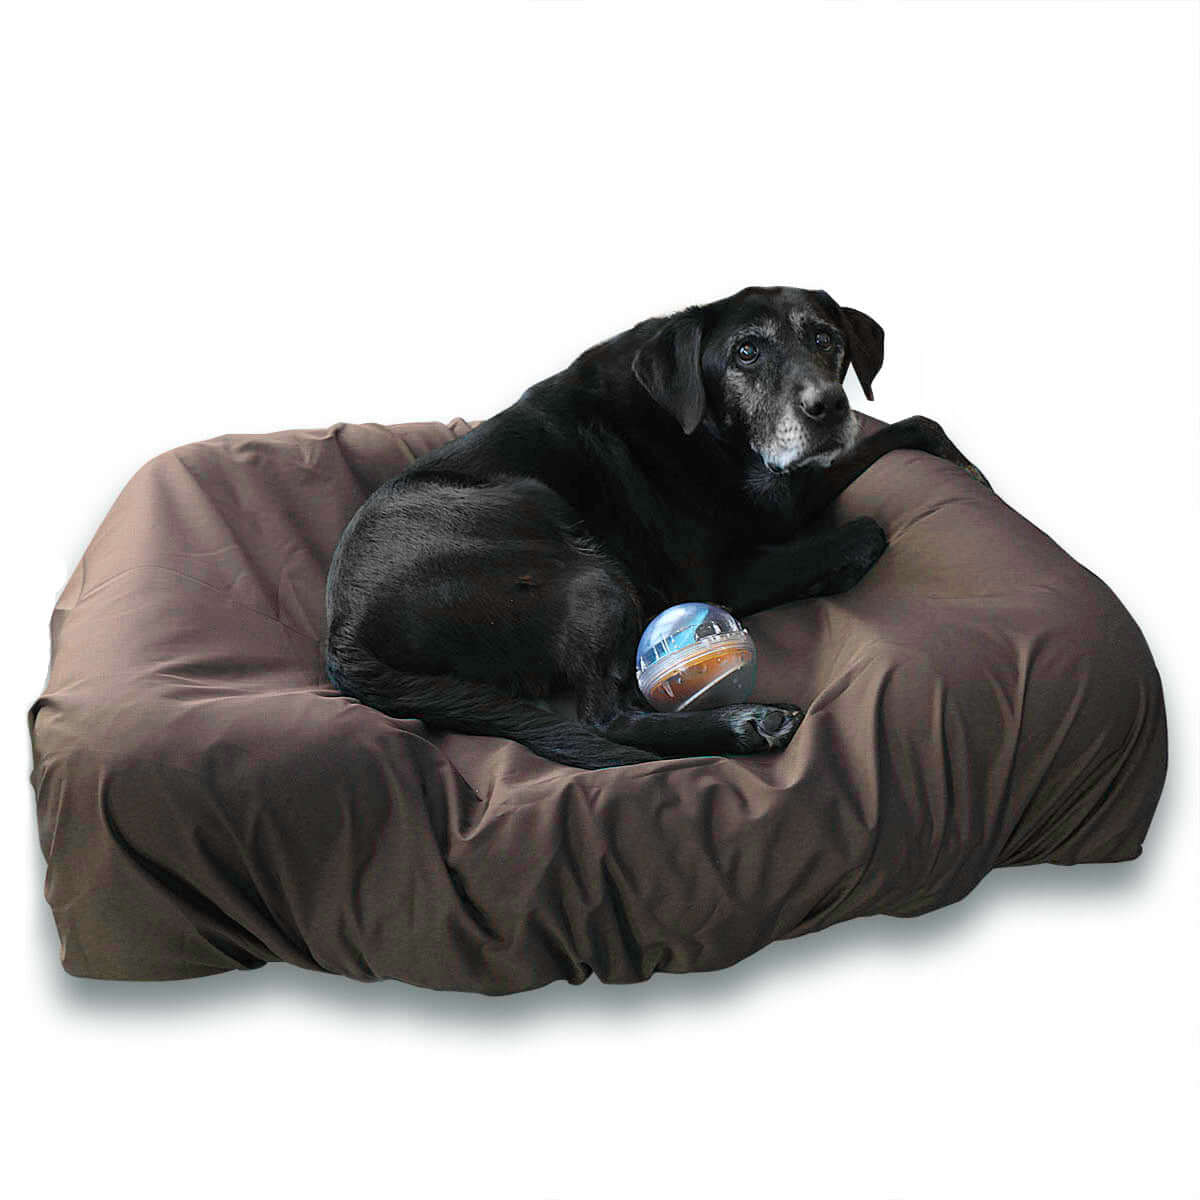 Slim PawSheets® for Low Profile Beds